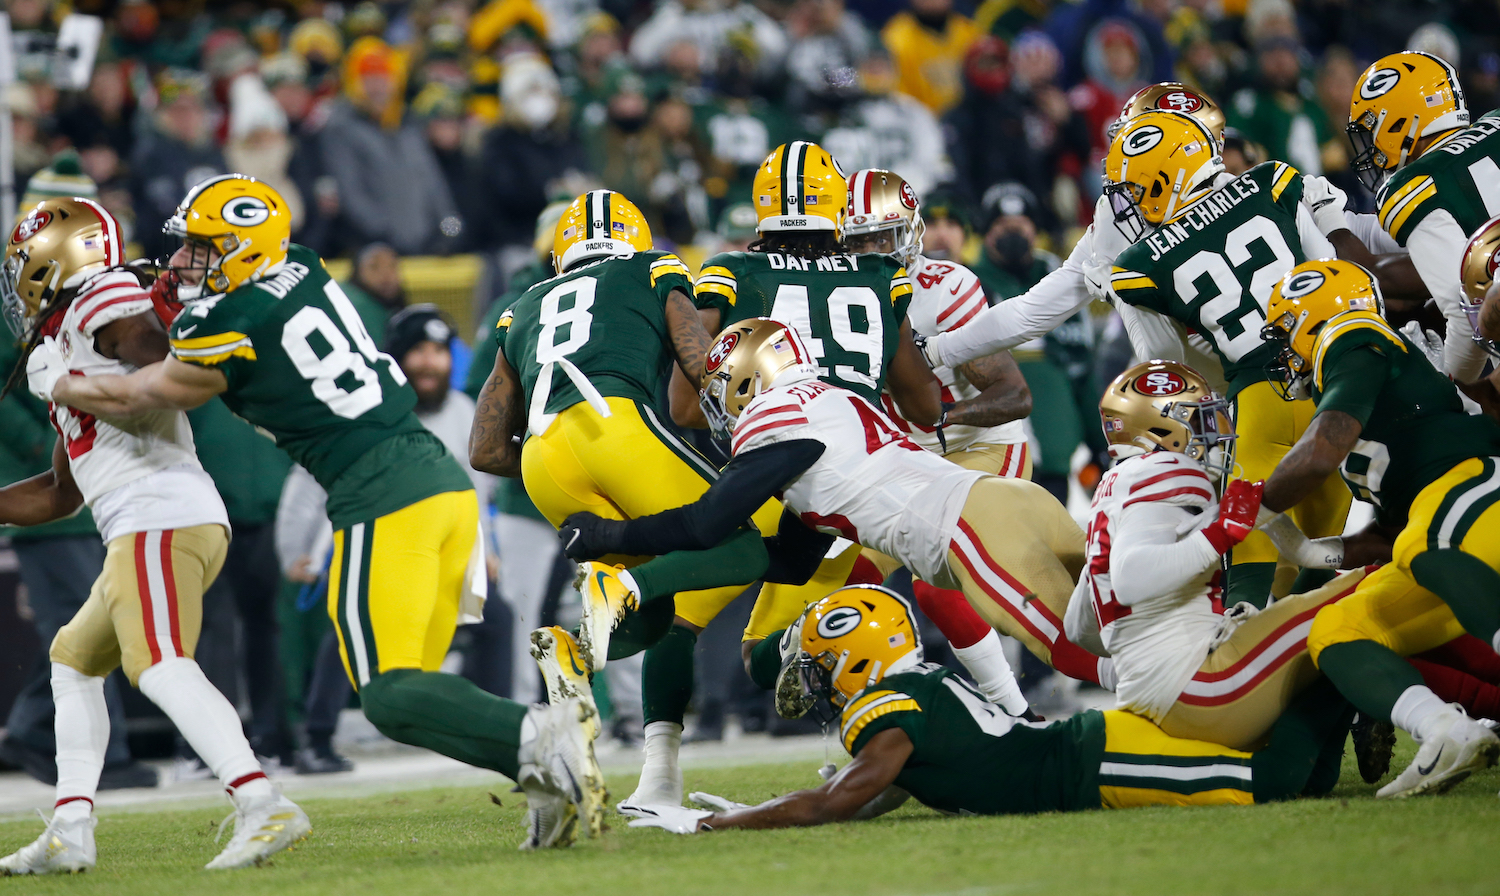 GREEN BAY, WISCONSIN - JANUARY 22: Demetrius Flannigan-Fowles #45 of the San Francisco 49ers tackles Amari Rodgers #8 of the Green Bay Packers during the NFC Divisional Playoff game at Lambeau Field on January 22, 2022 in Green Bay, Wisconsin. The 49ers defeated the Packers 13-10. (Photo by Michael Zagaris/San Francisco 49ers/Getty Images) *** Local Caption *** Demetrius Flannigan-Fowles;Amari Rodgers